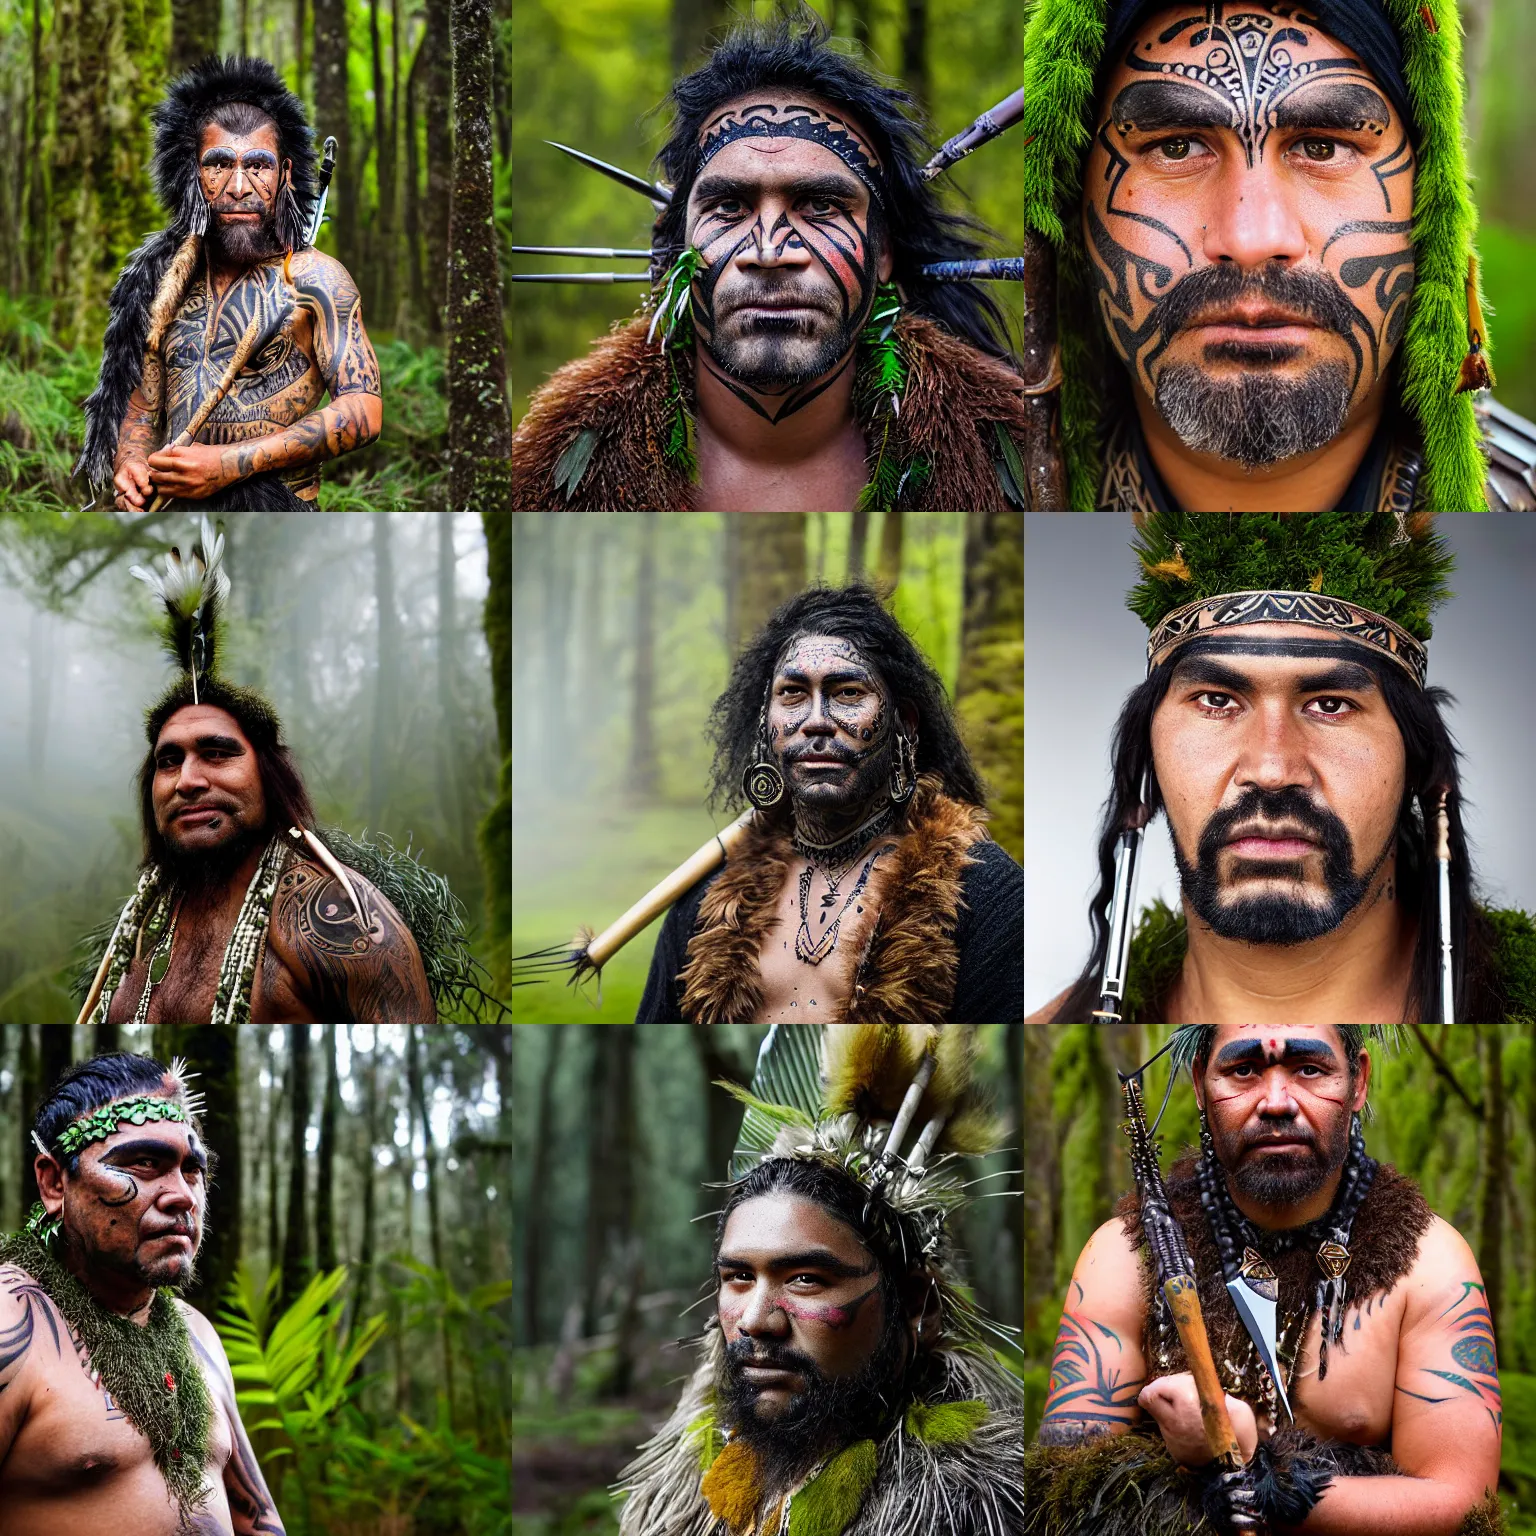 Prompt: Portrait of male Māori warrior holding a spear in damp cold mossy misty New Zealand forest, Moko traditional face tattoo, staring at you, wearing greenstone jewellery and a feather cloak, 100 mm lens